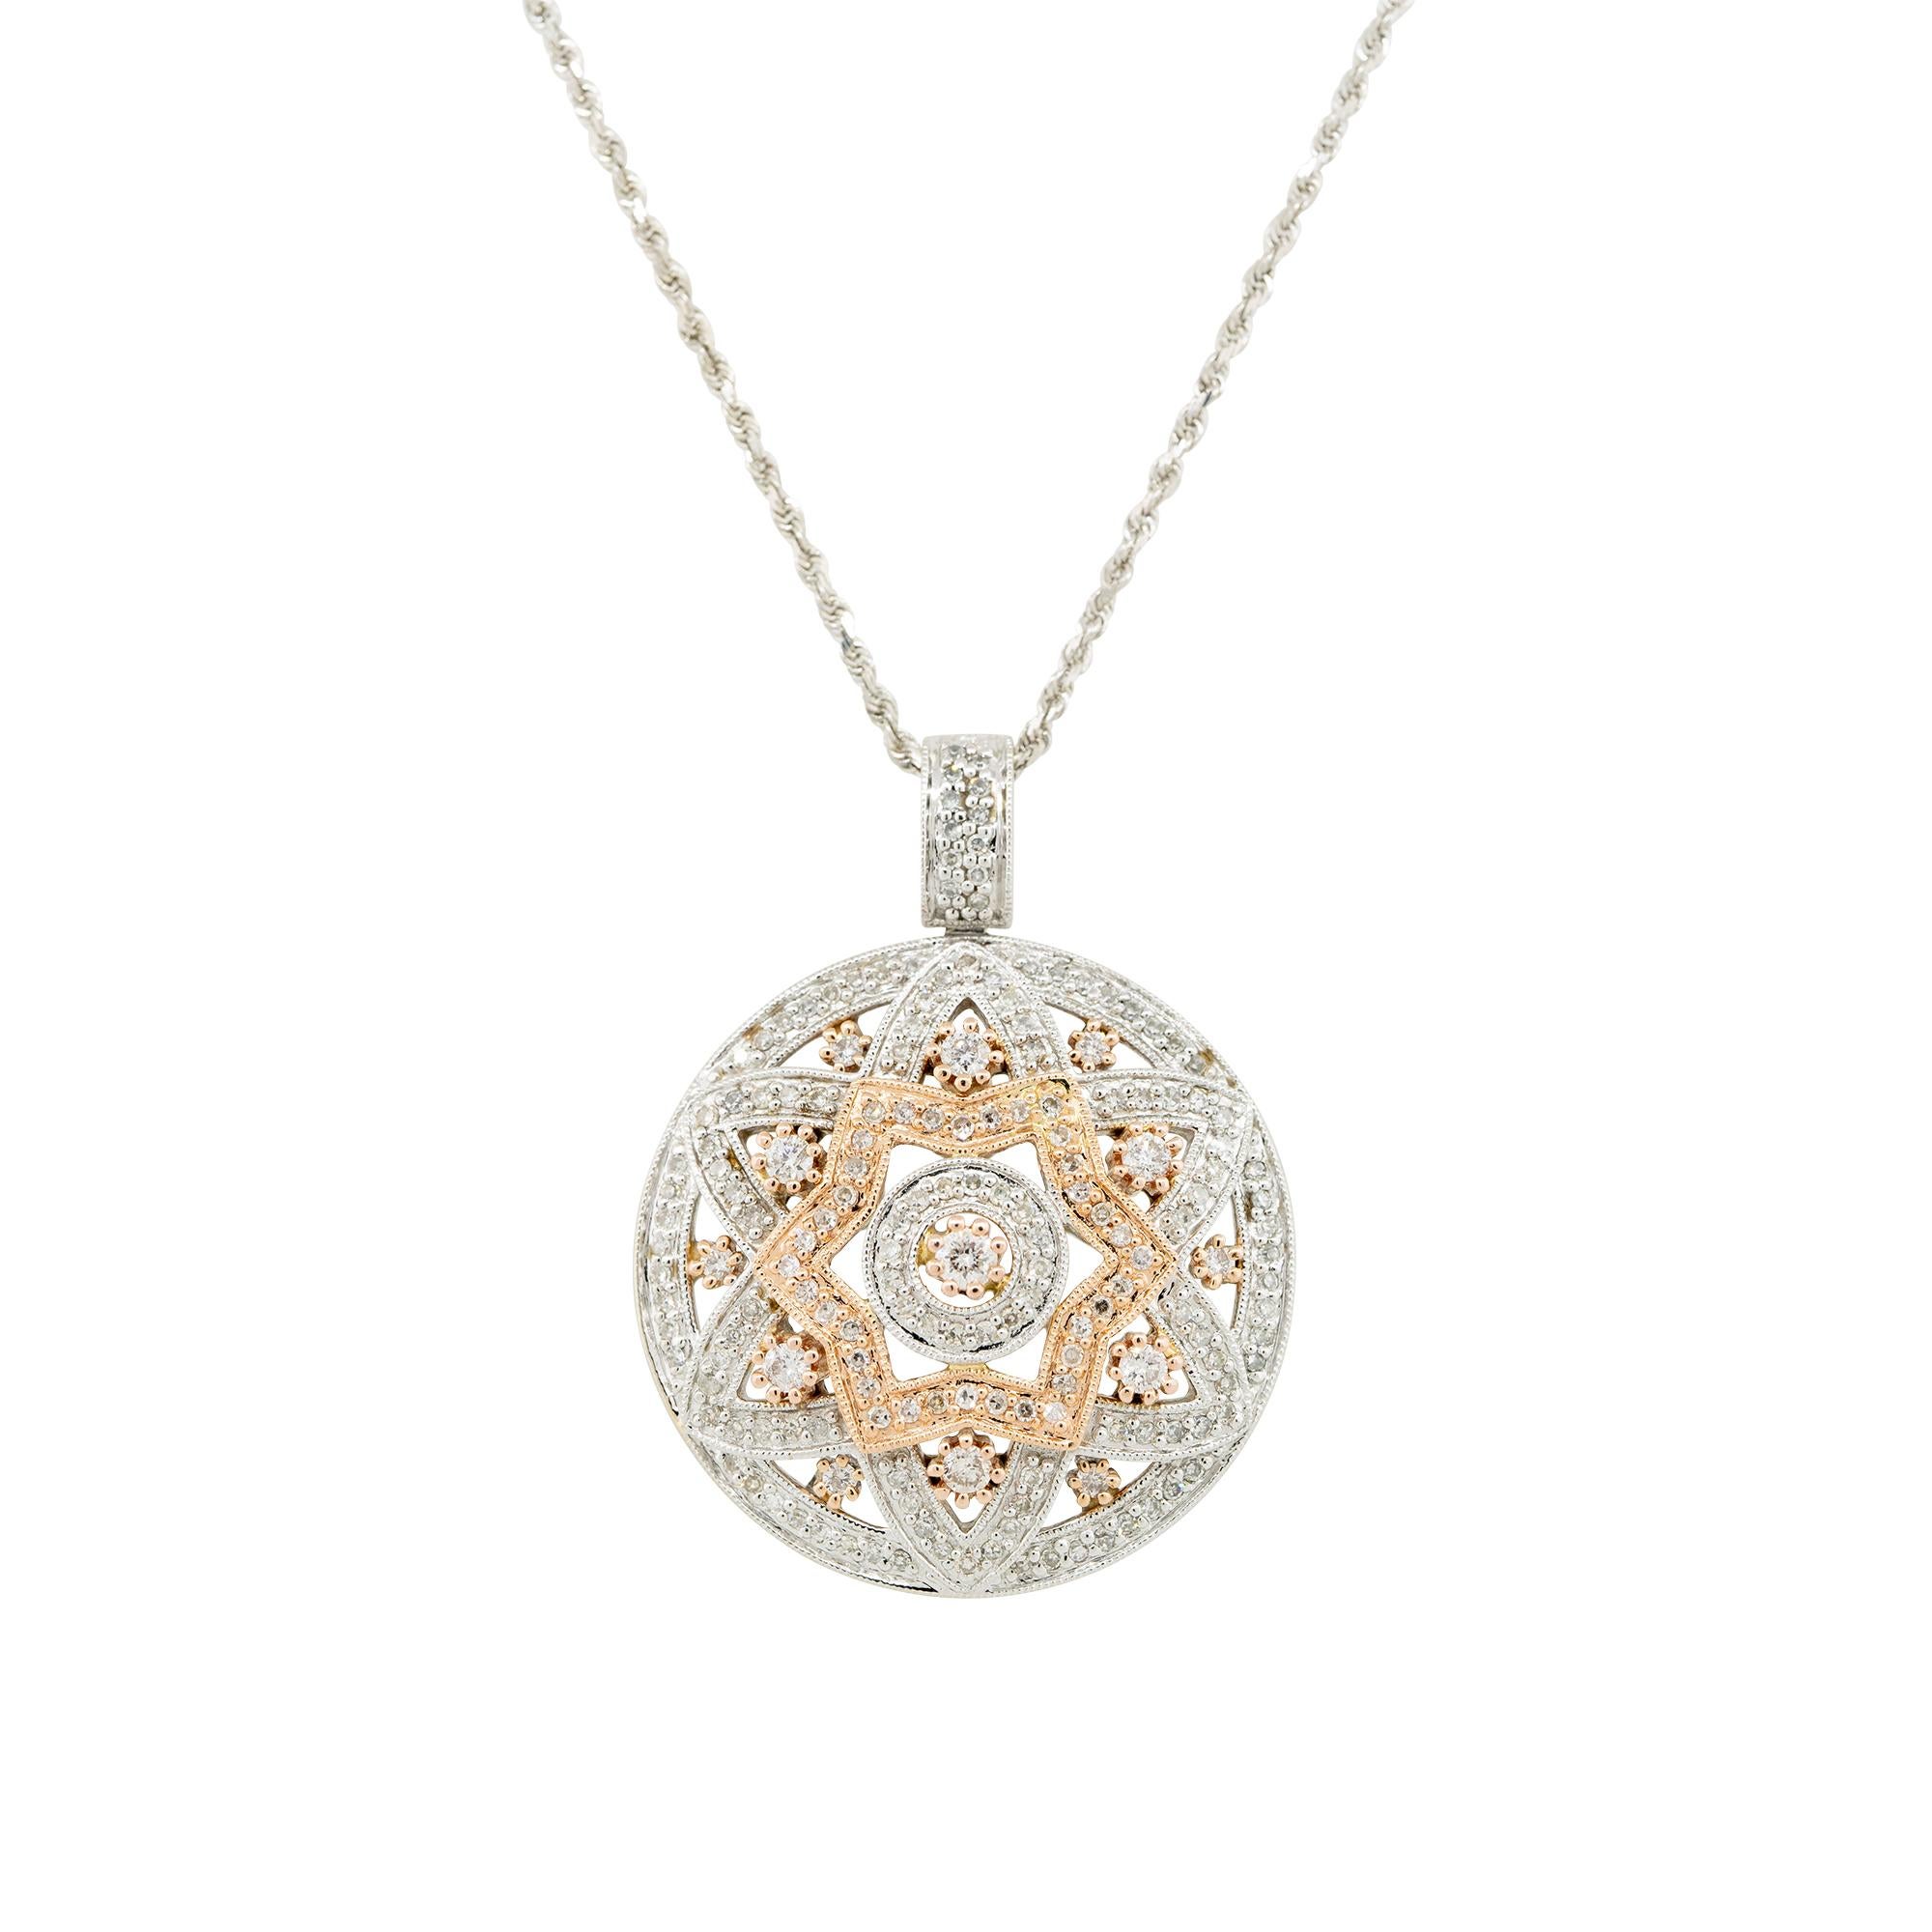 14k White and Rose Gold 1.25ctw Round Diamond Star Pendant on Chain
Material: 14k White Gold and 14k Rose Gold
Diamond Details: Approximately 1.25ctw of Round Brilliant Diamonds
Pendant Length: 27.13mm x 10.31mm x 27.18mm
Total Weight: 11.6g